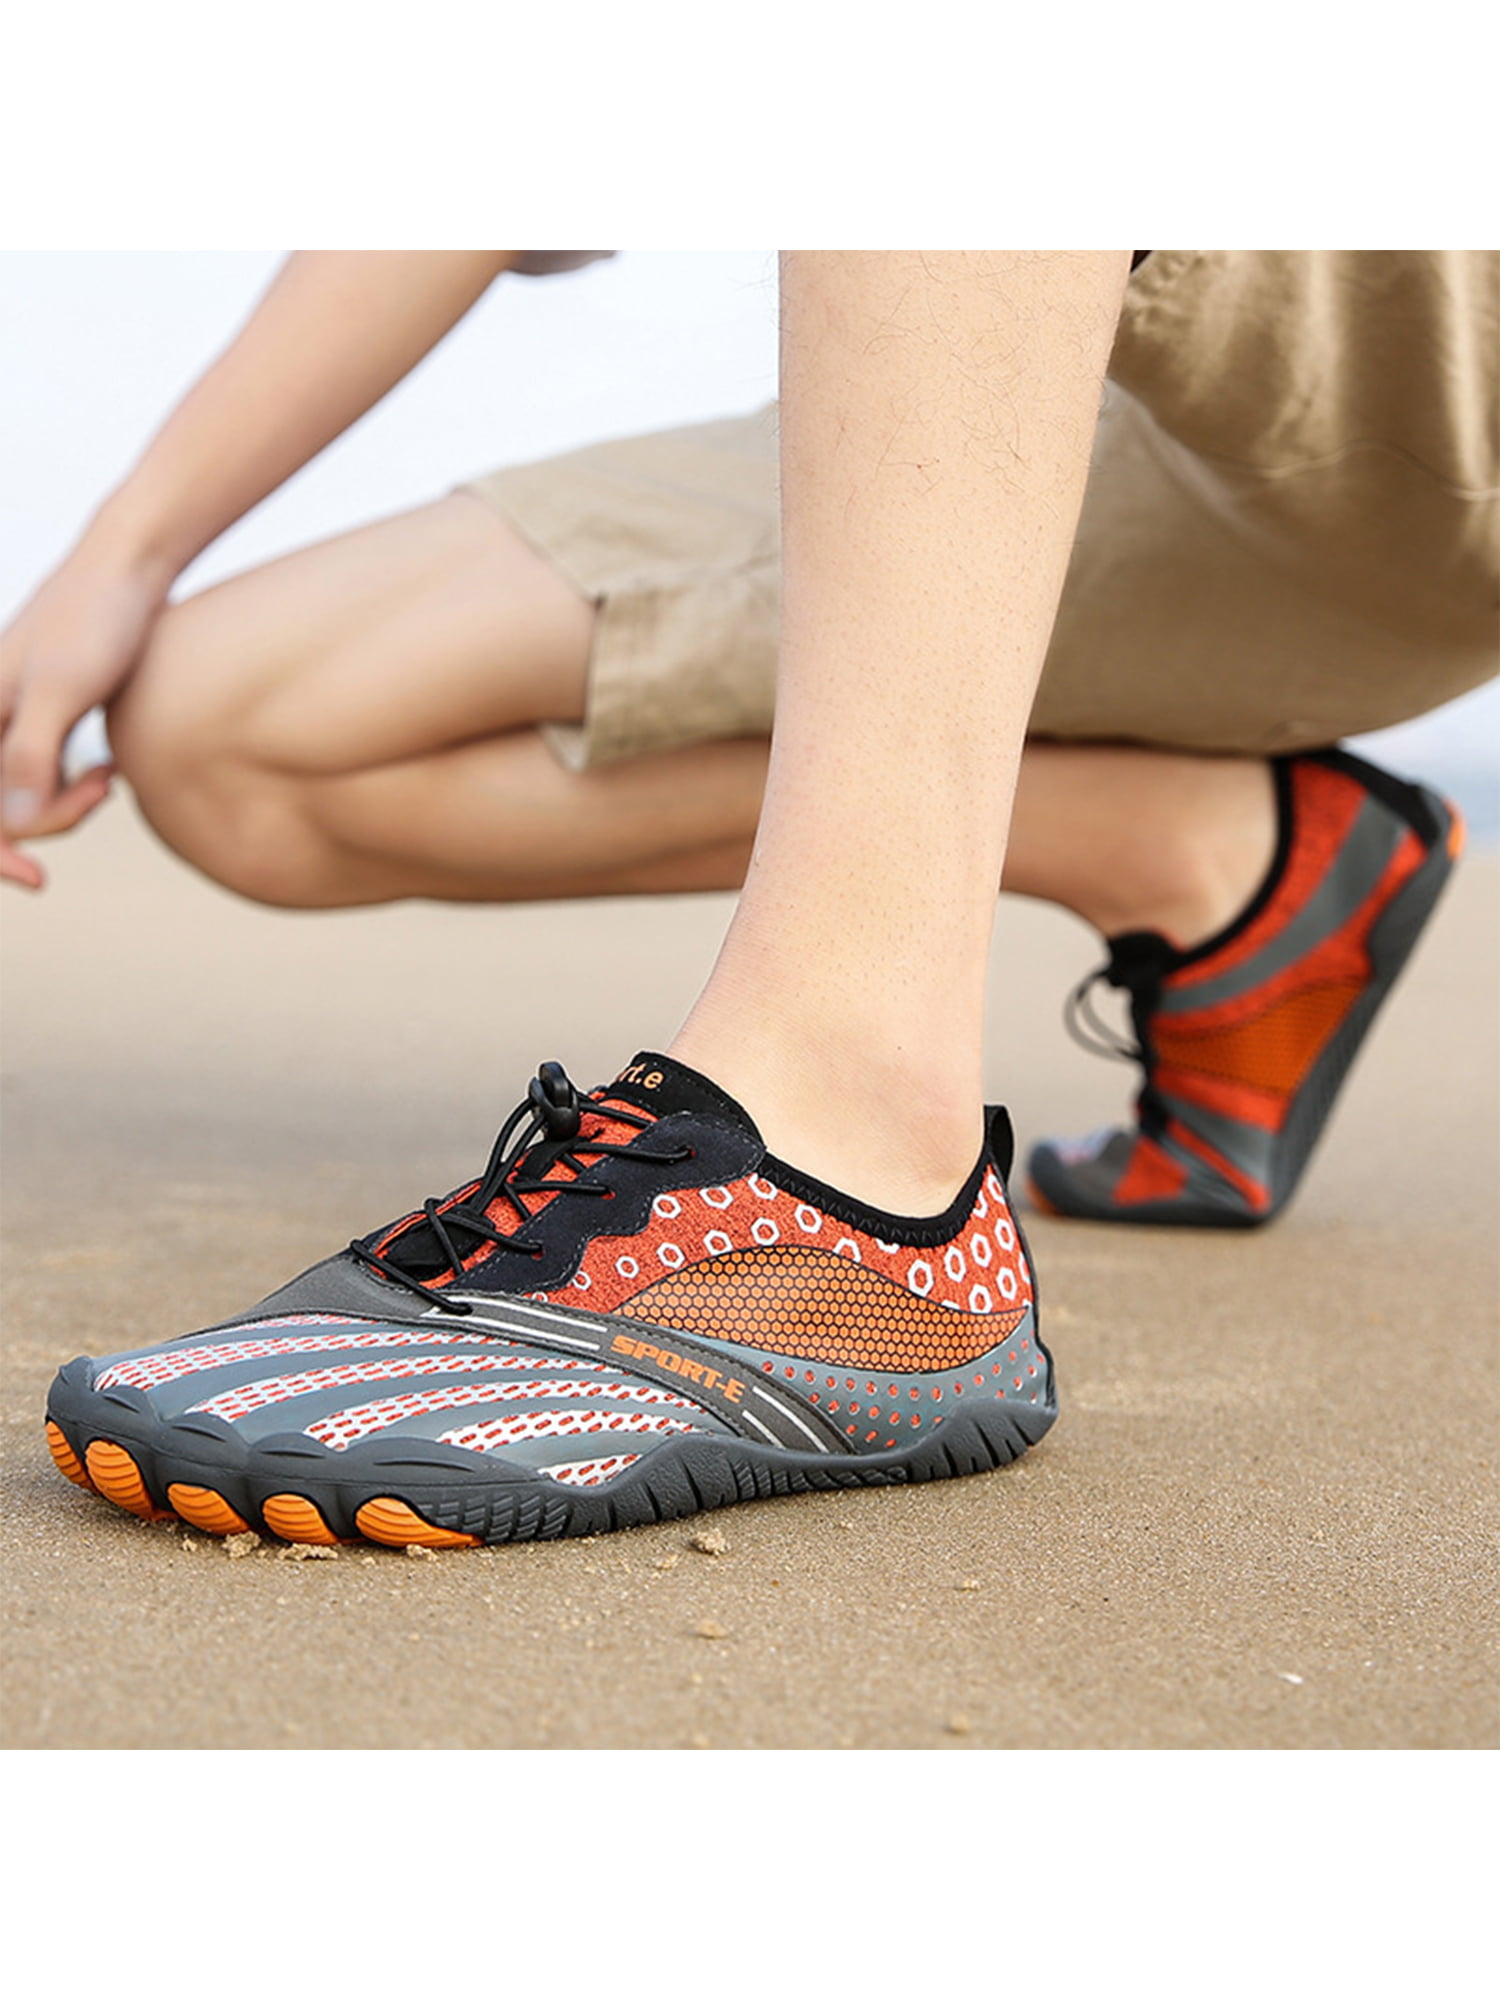 Female Summer Diamond Printed Quick-Dry Yoga Aqua Shoes Lightweight Slip-Proof Sport Surf Wading Shoes Women Water Shoes